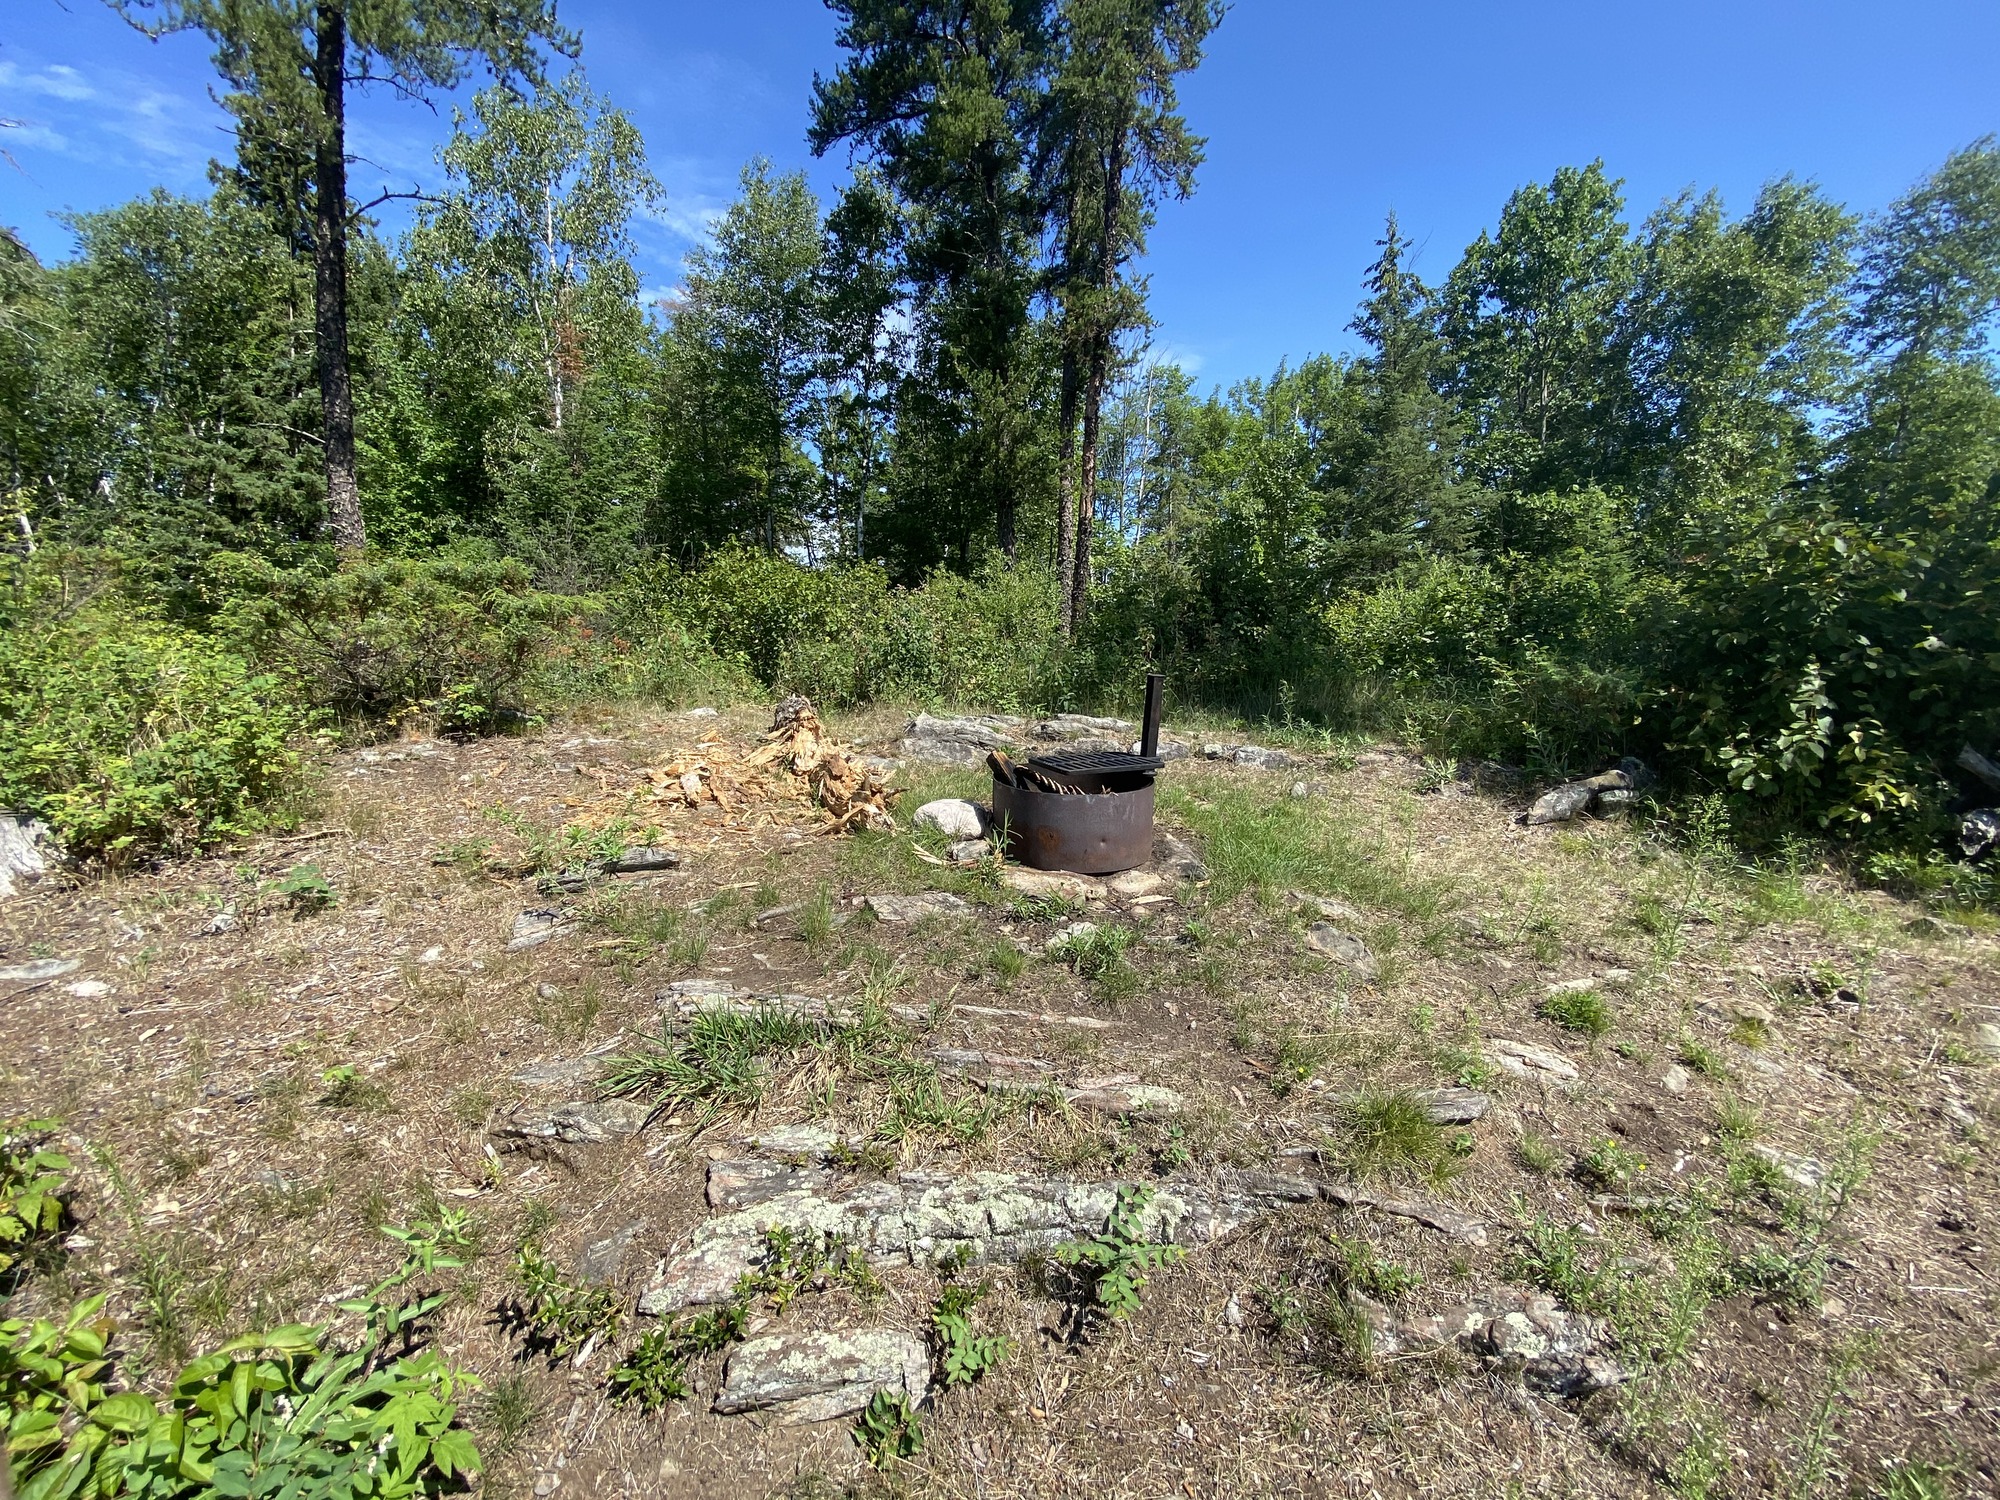 View looking into houseboat site core of rough rock terrain with the campfire ring in the middle. In the background are small shrubs and a few large trees.